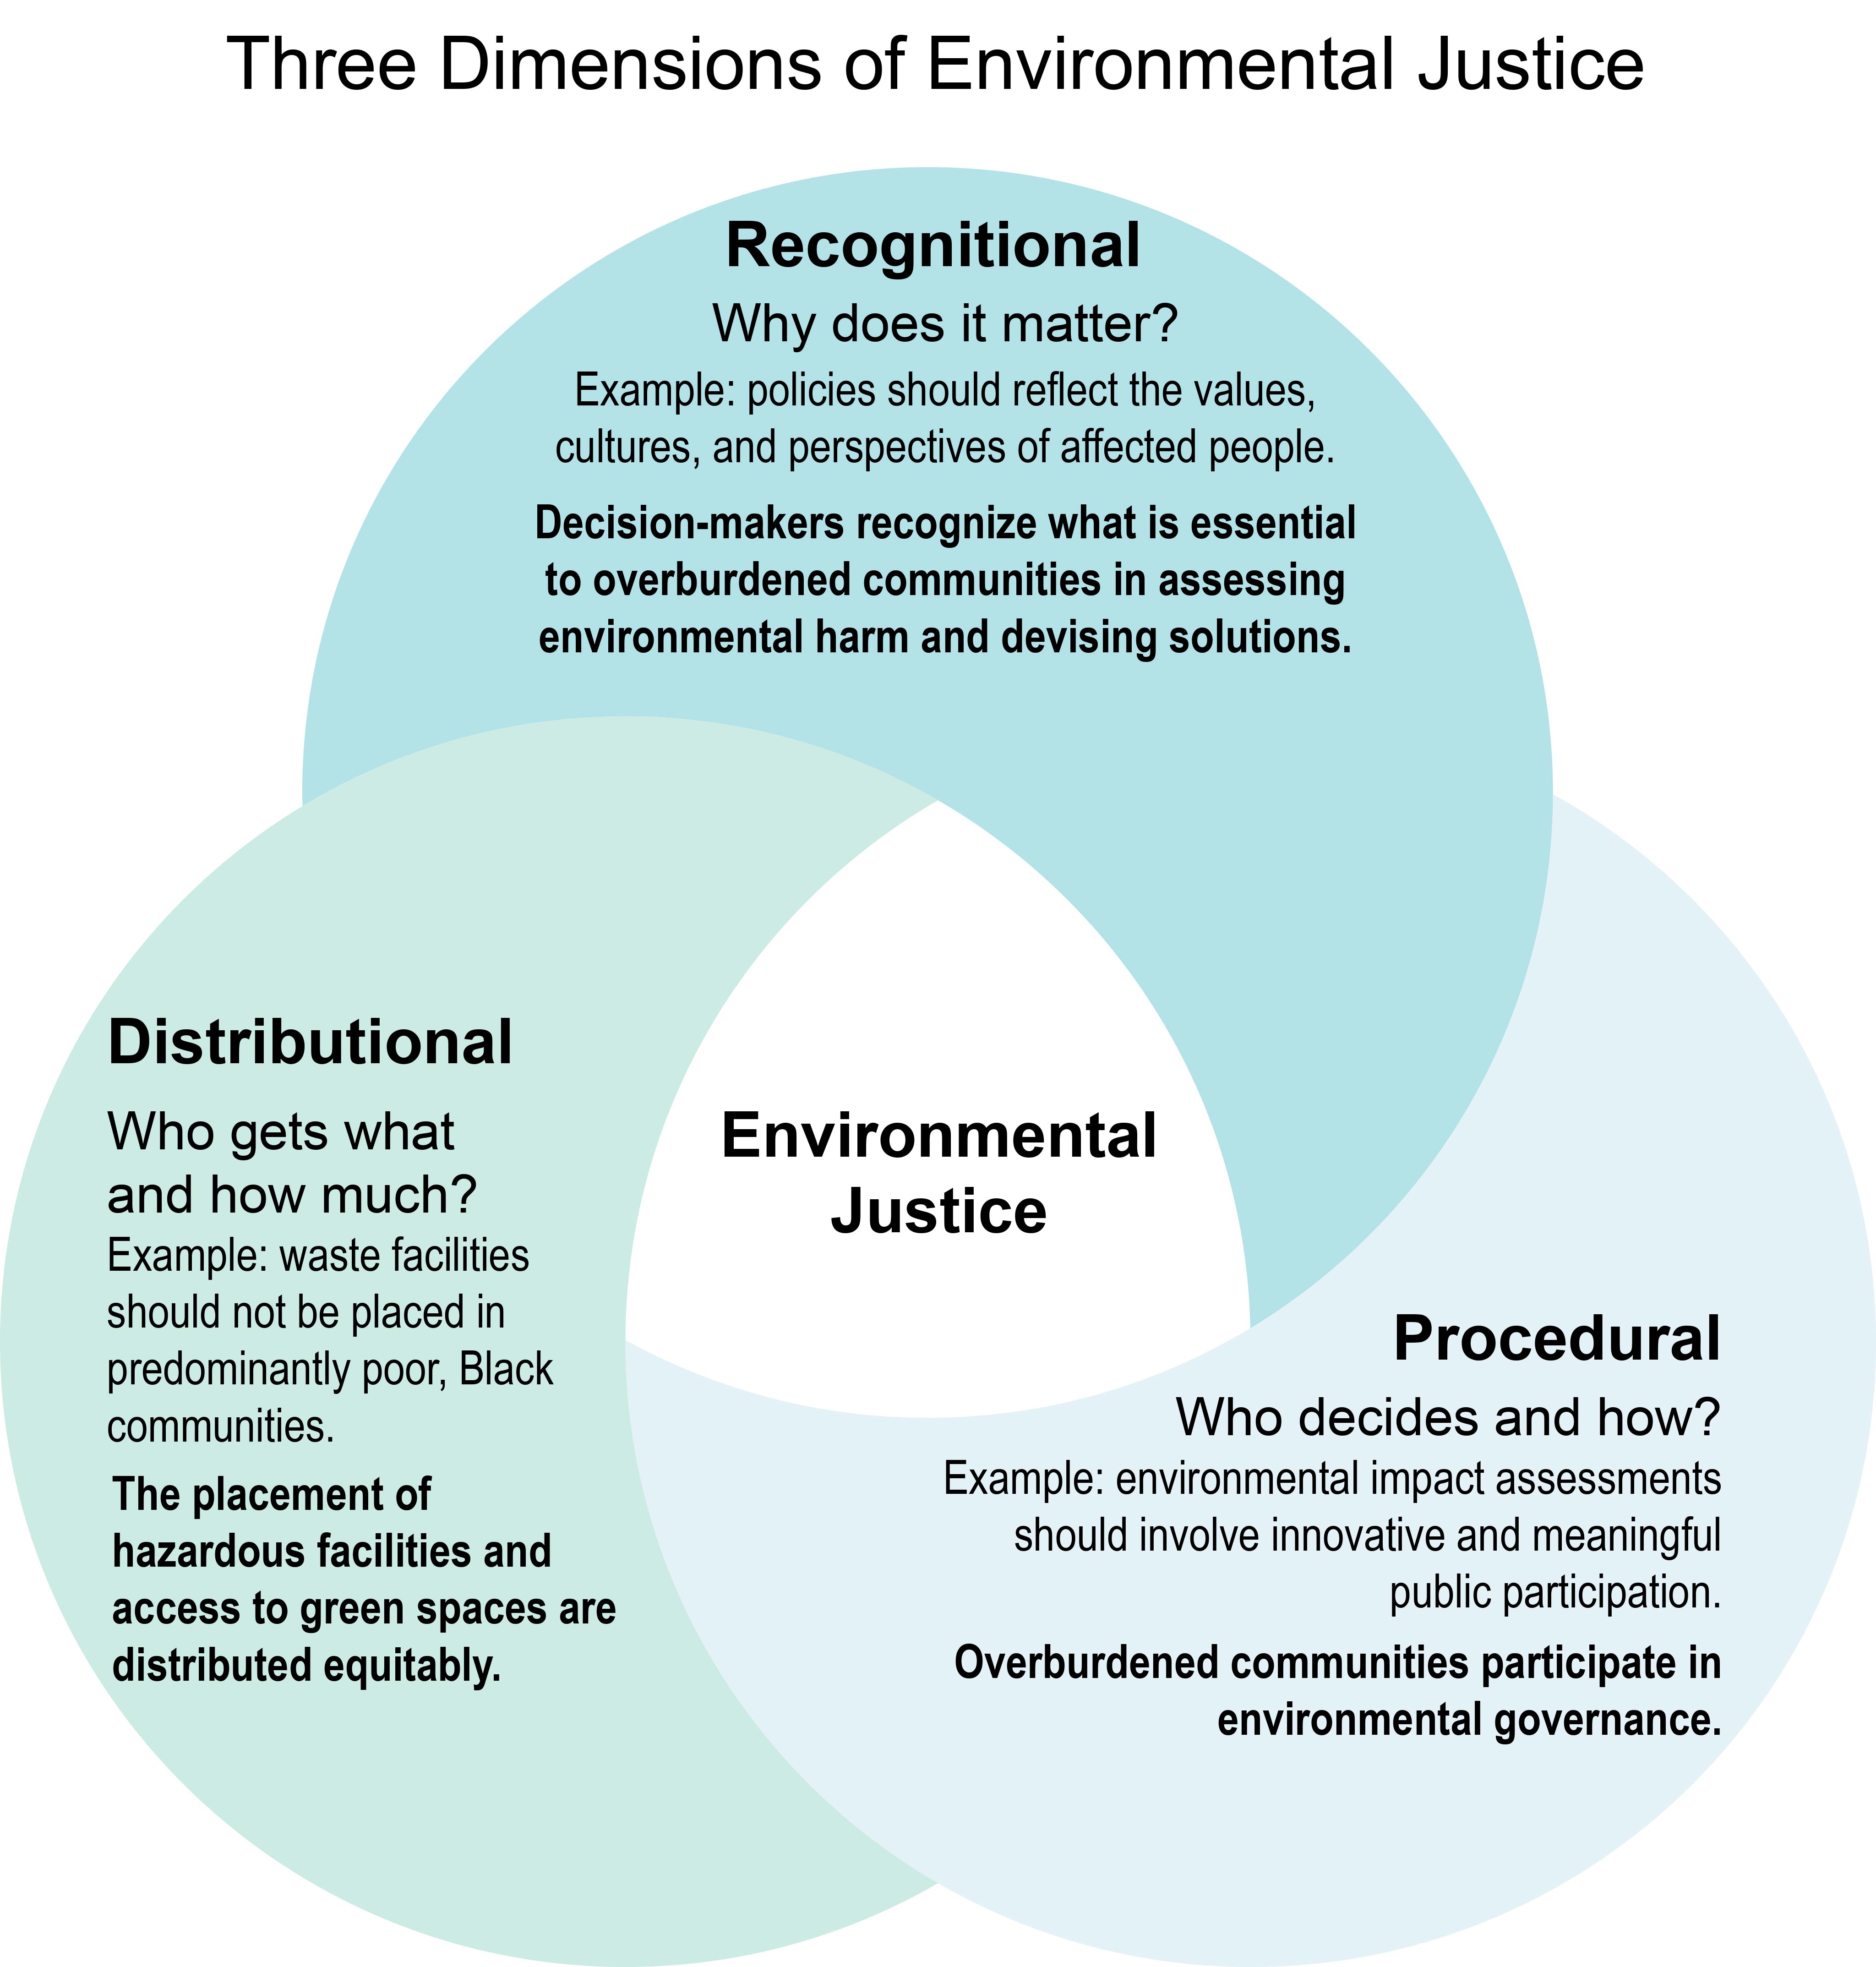 Three Dimensions of Environmental Justice